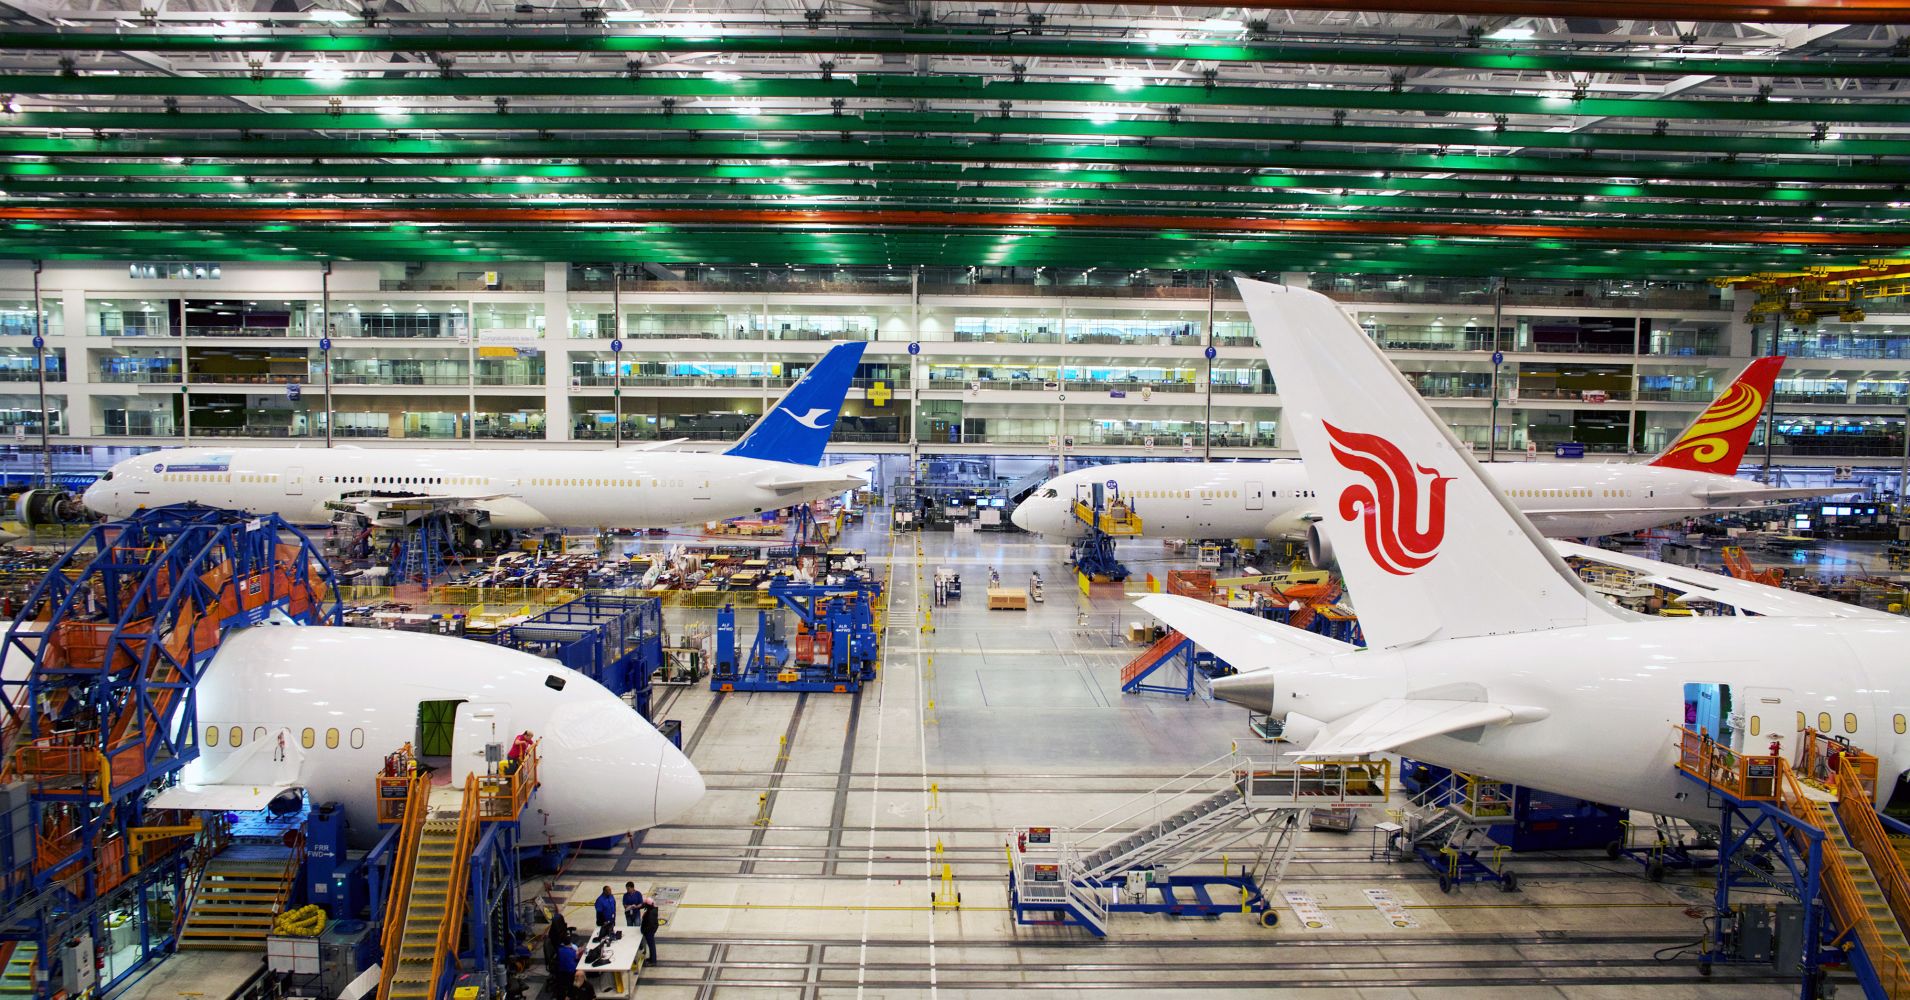 Boeing's final assembly facility in North Charleston, South Carolina.